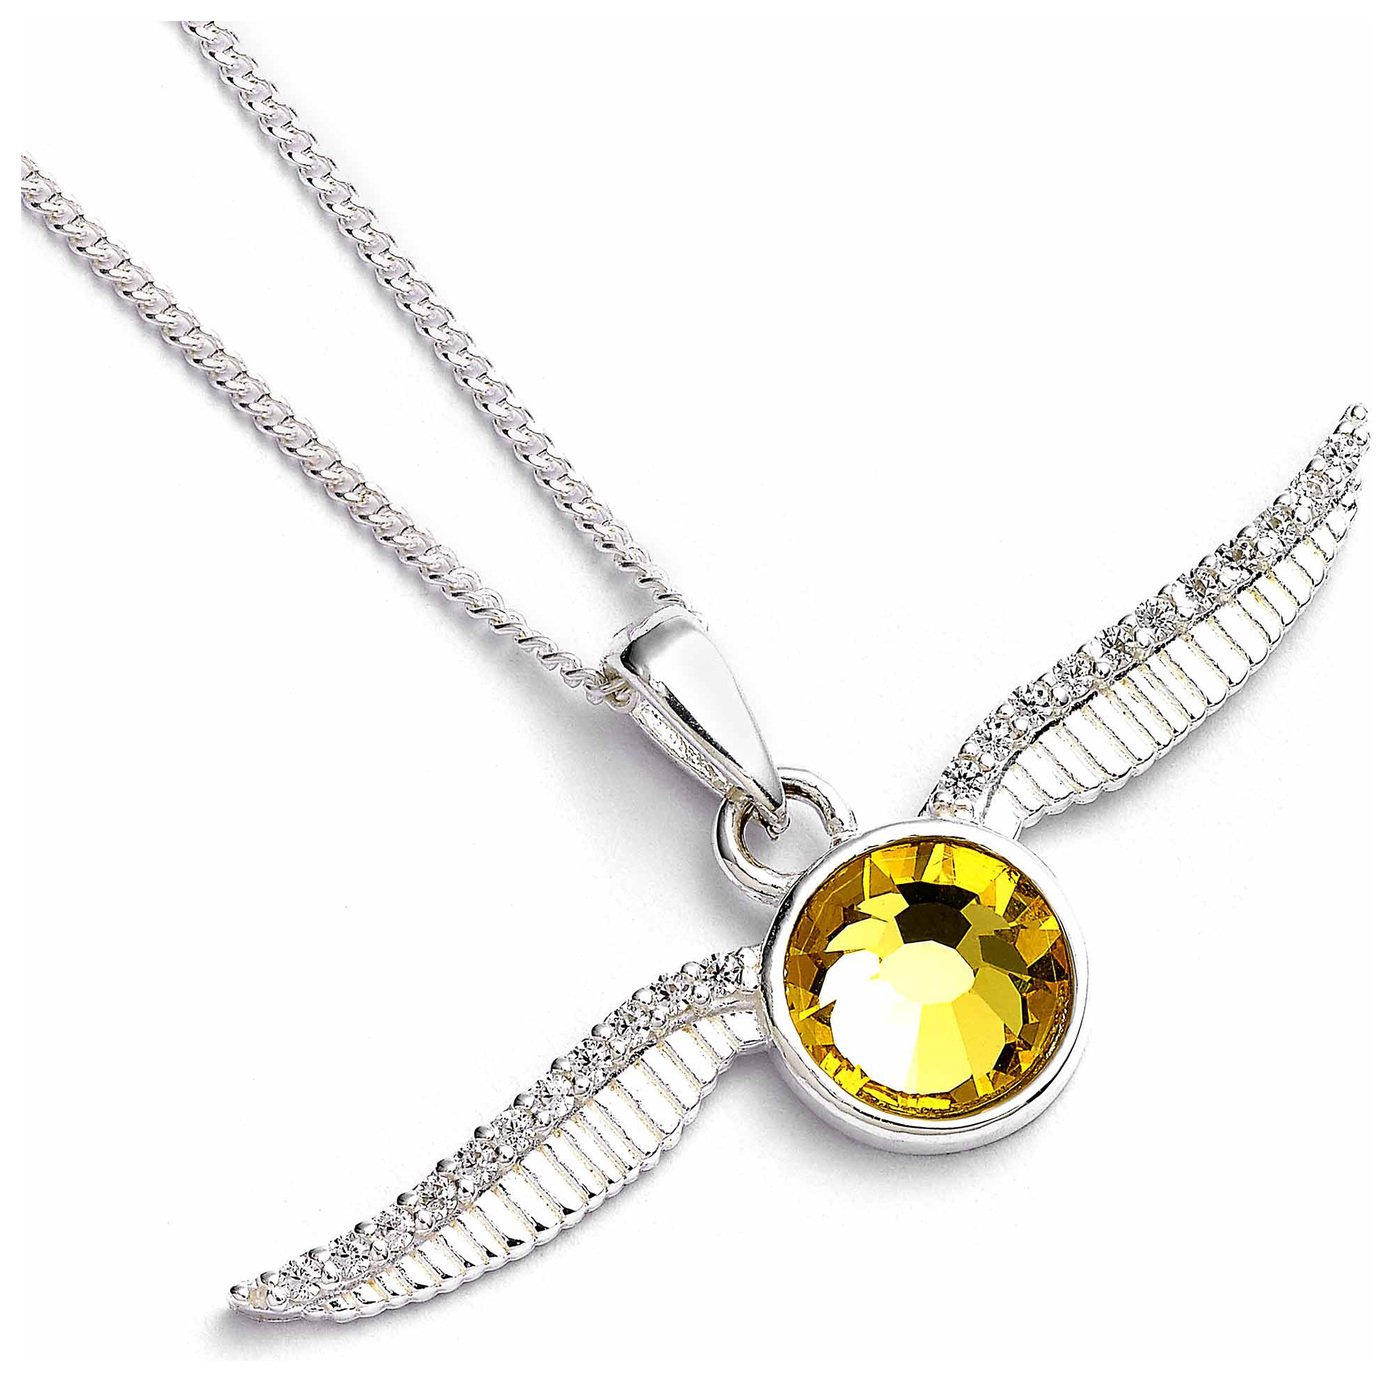 Harry Potter Golden Snitch Necklace with Crystals